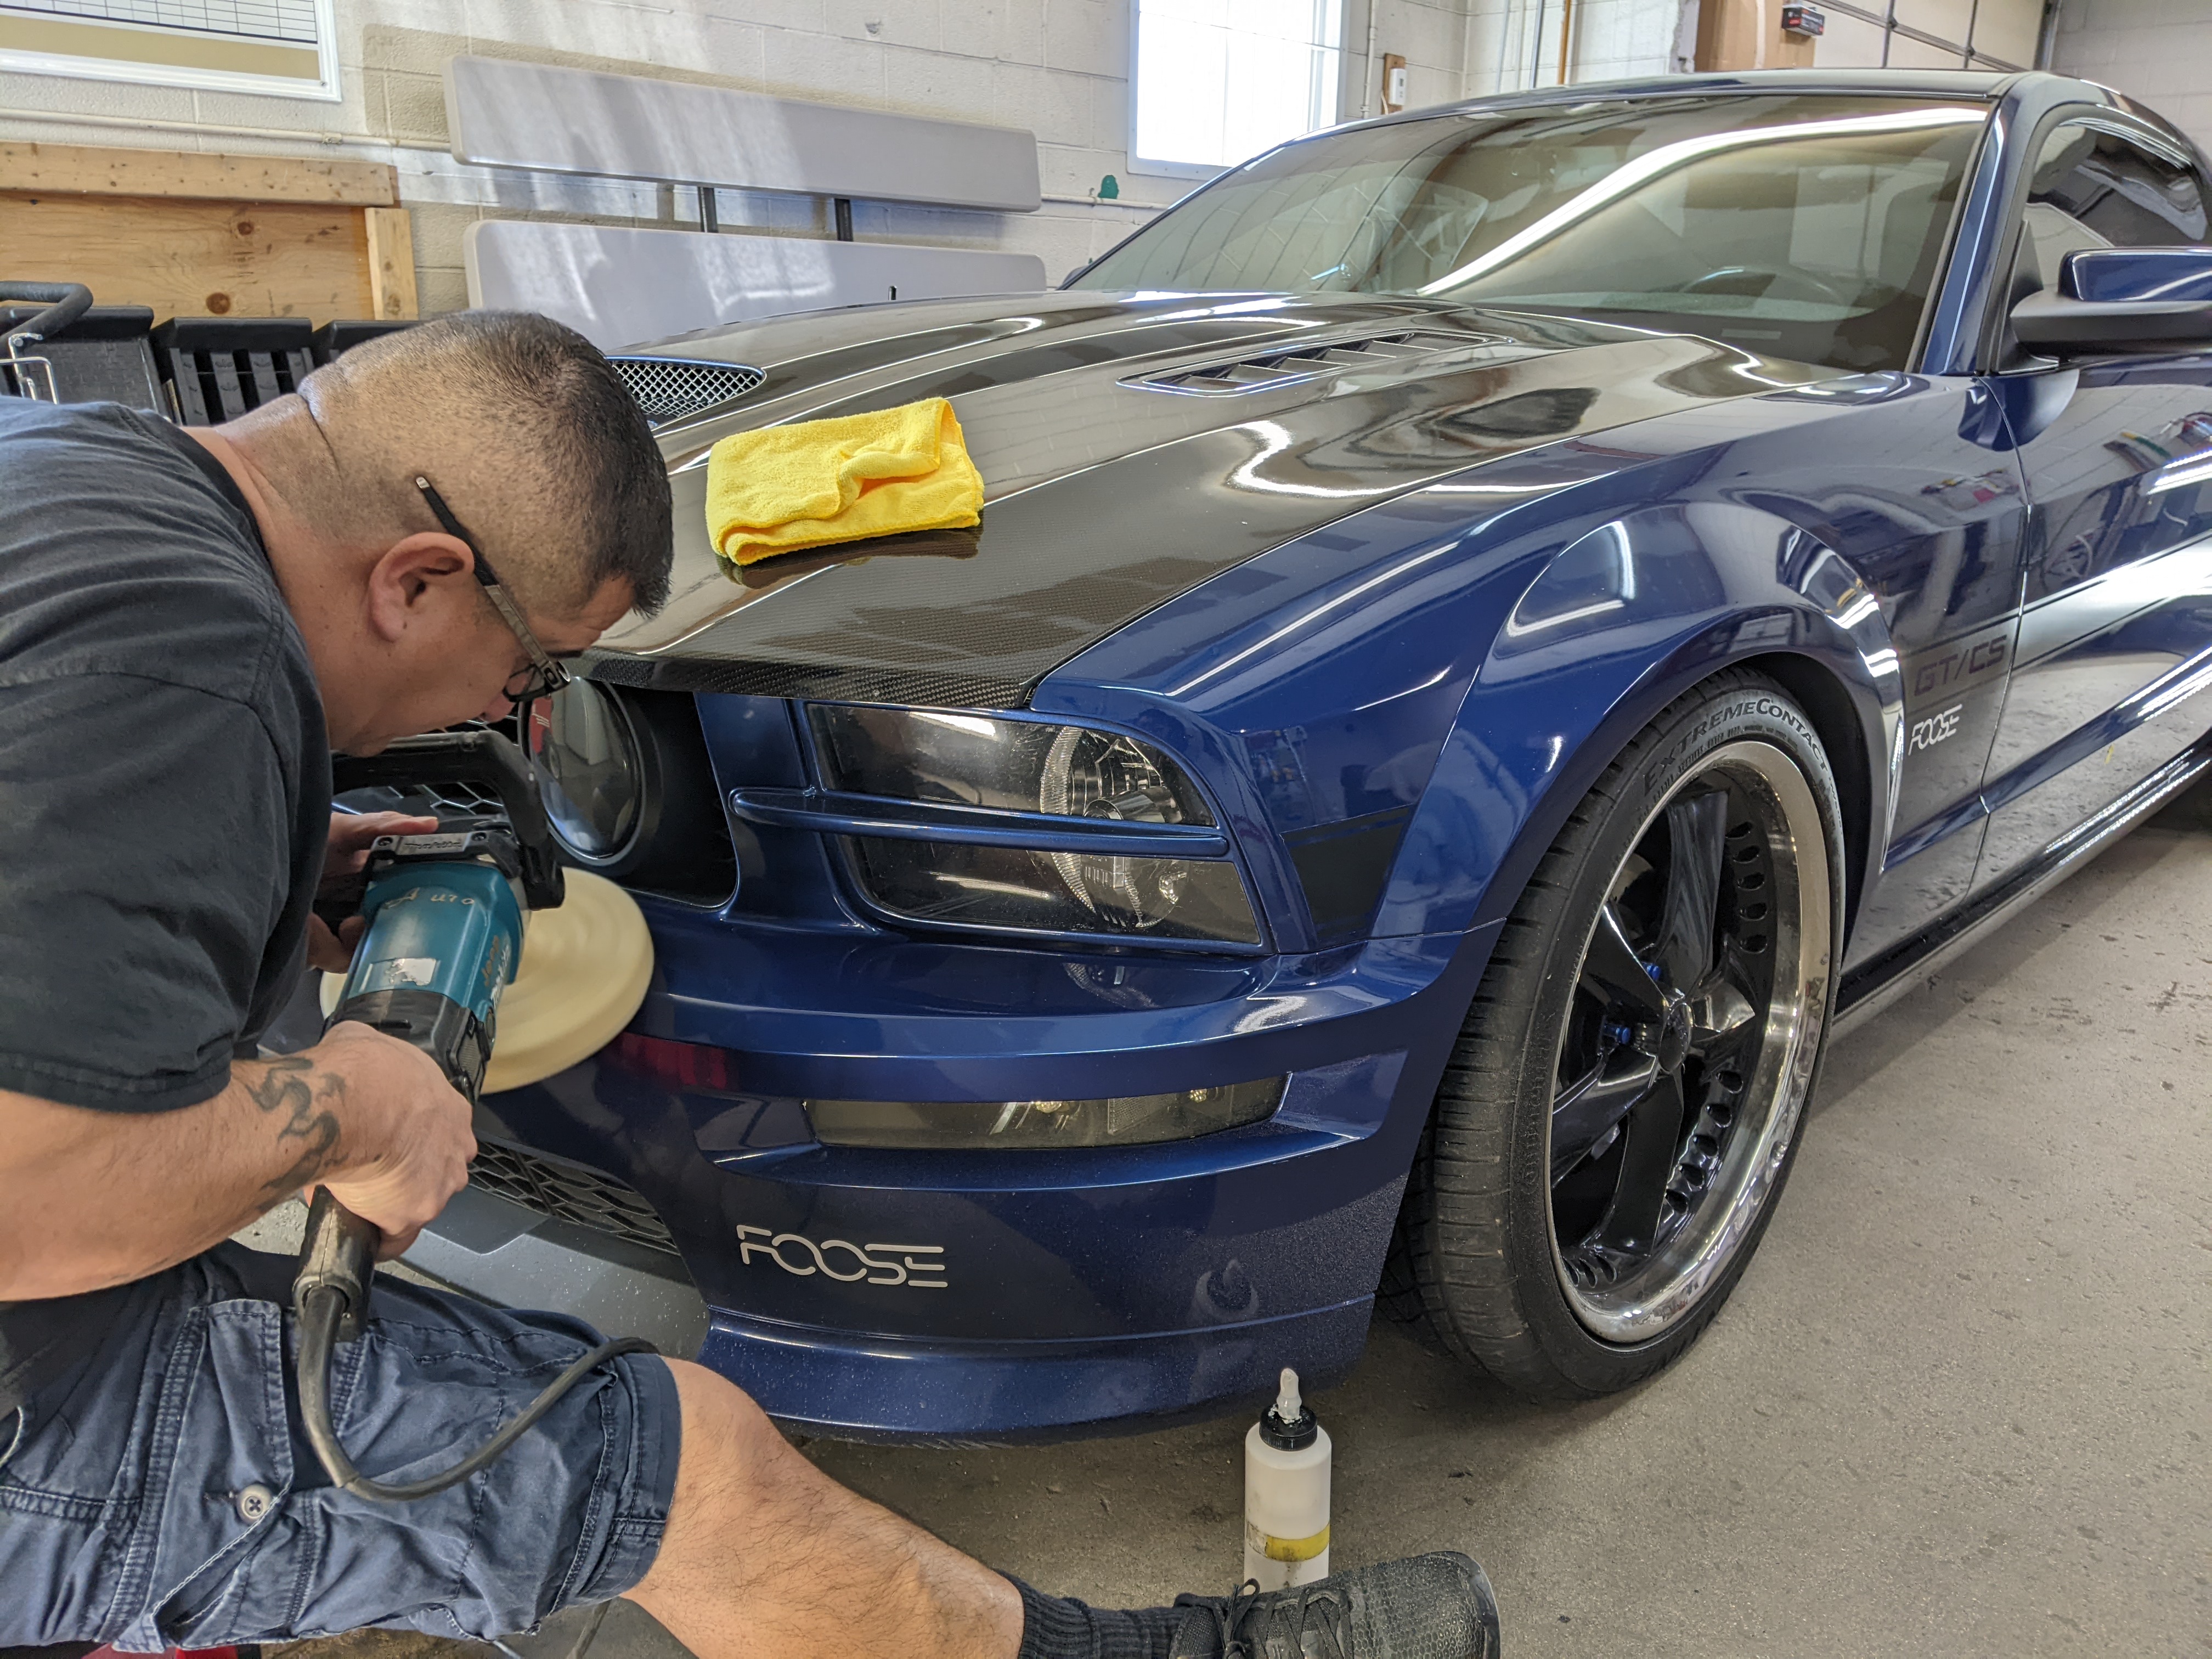 First step of the 2-step paint correction begins. Notice the lack of clear bra on the hood and fenders. The clear bra was removed prior to starting the 2-step paint correction process. This was followed by the second and final step of the 2-step paint correction.